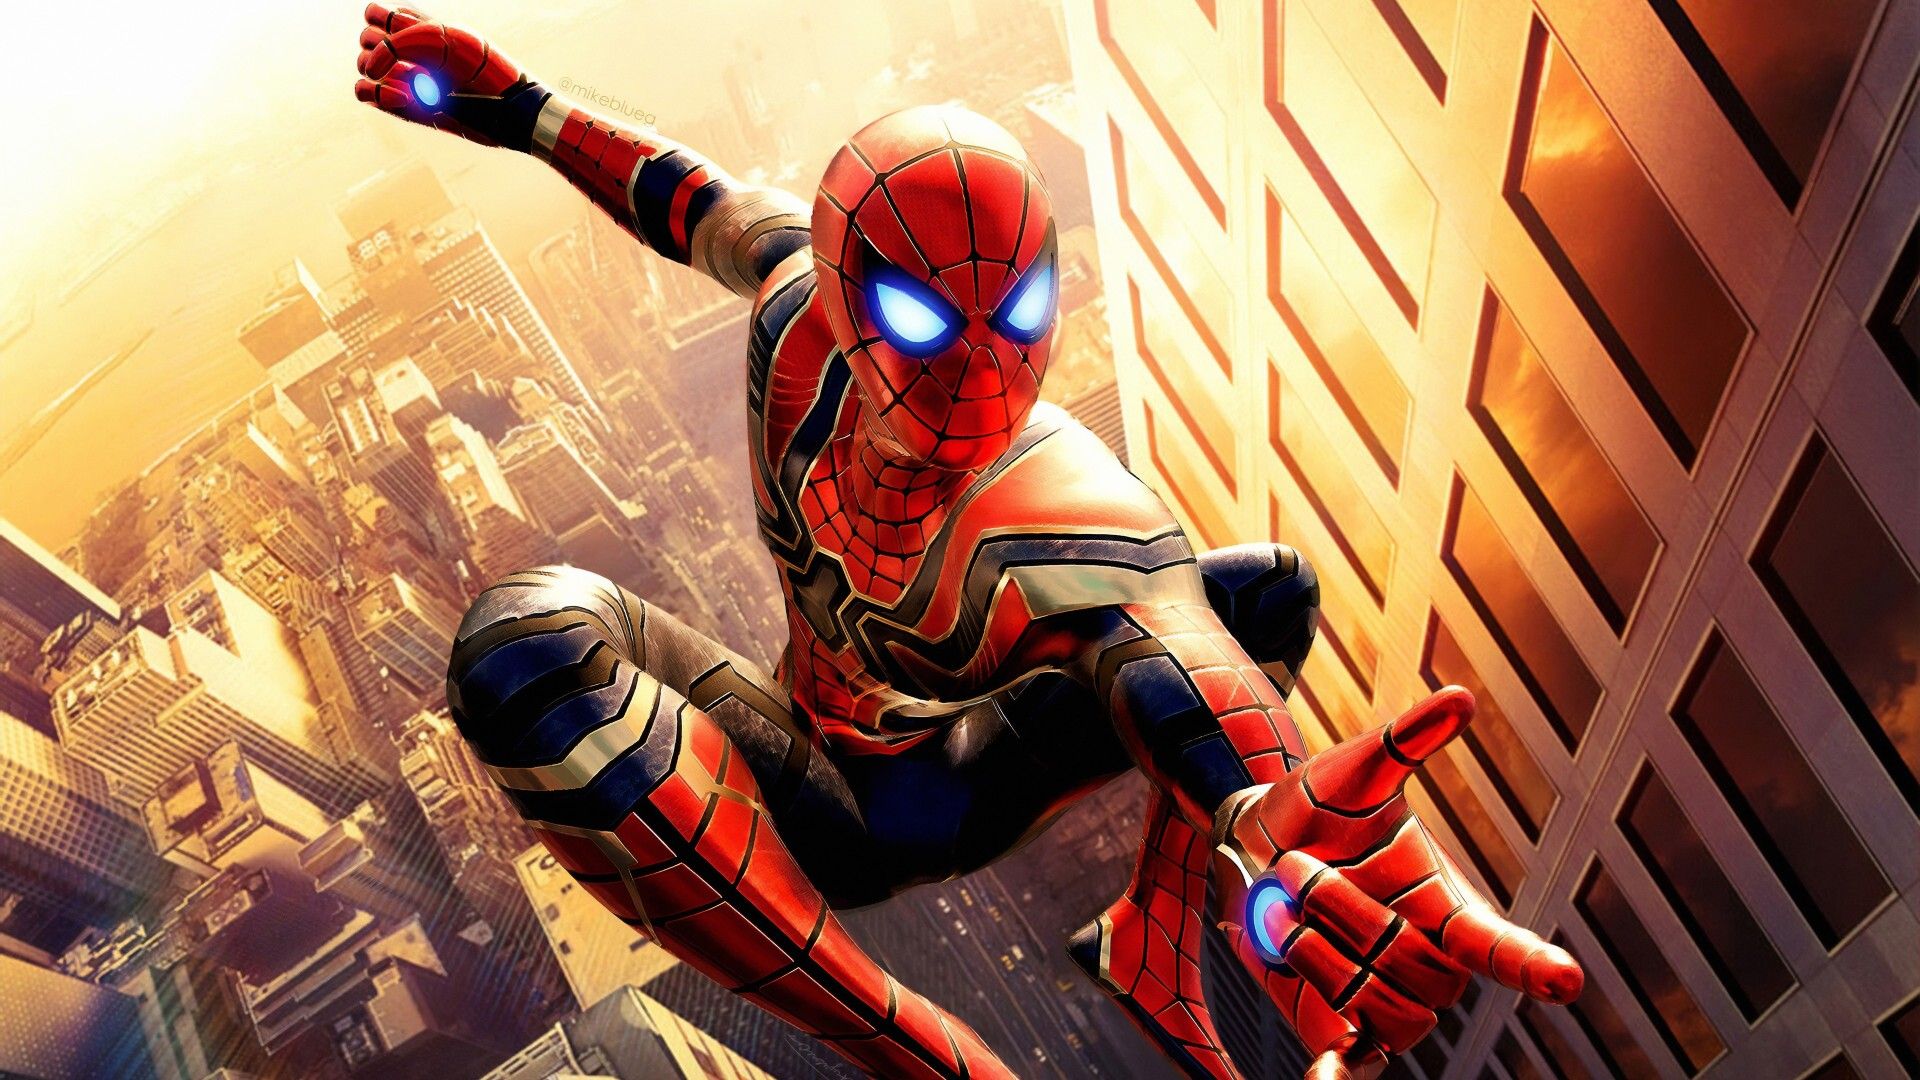 Stunning Spiderman Wallpaper to Choose From